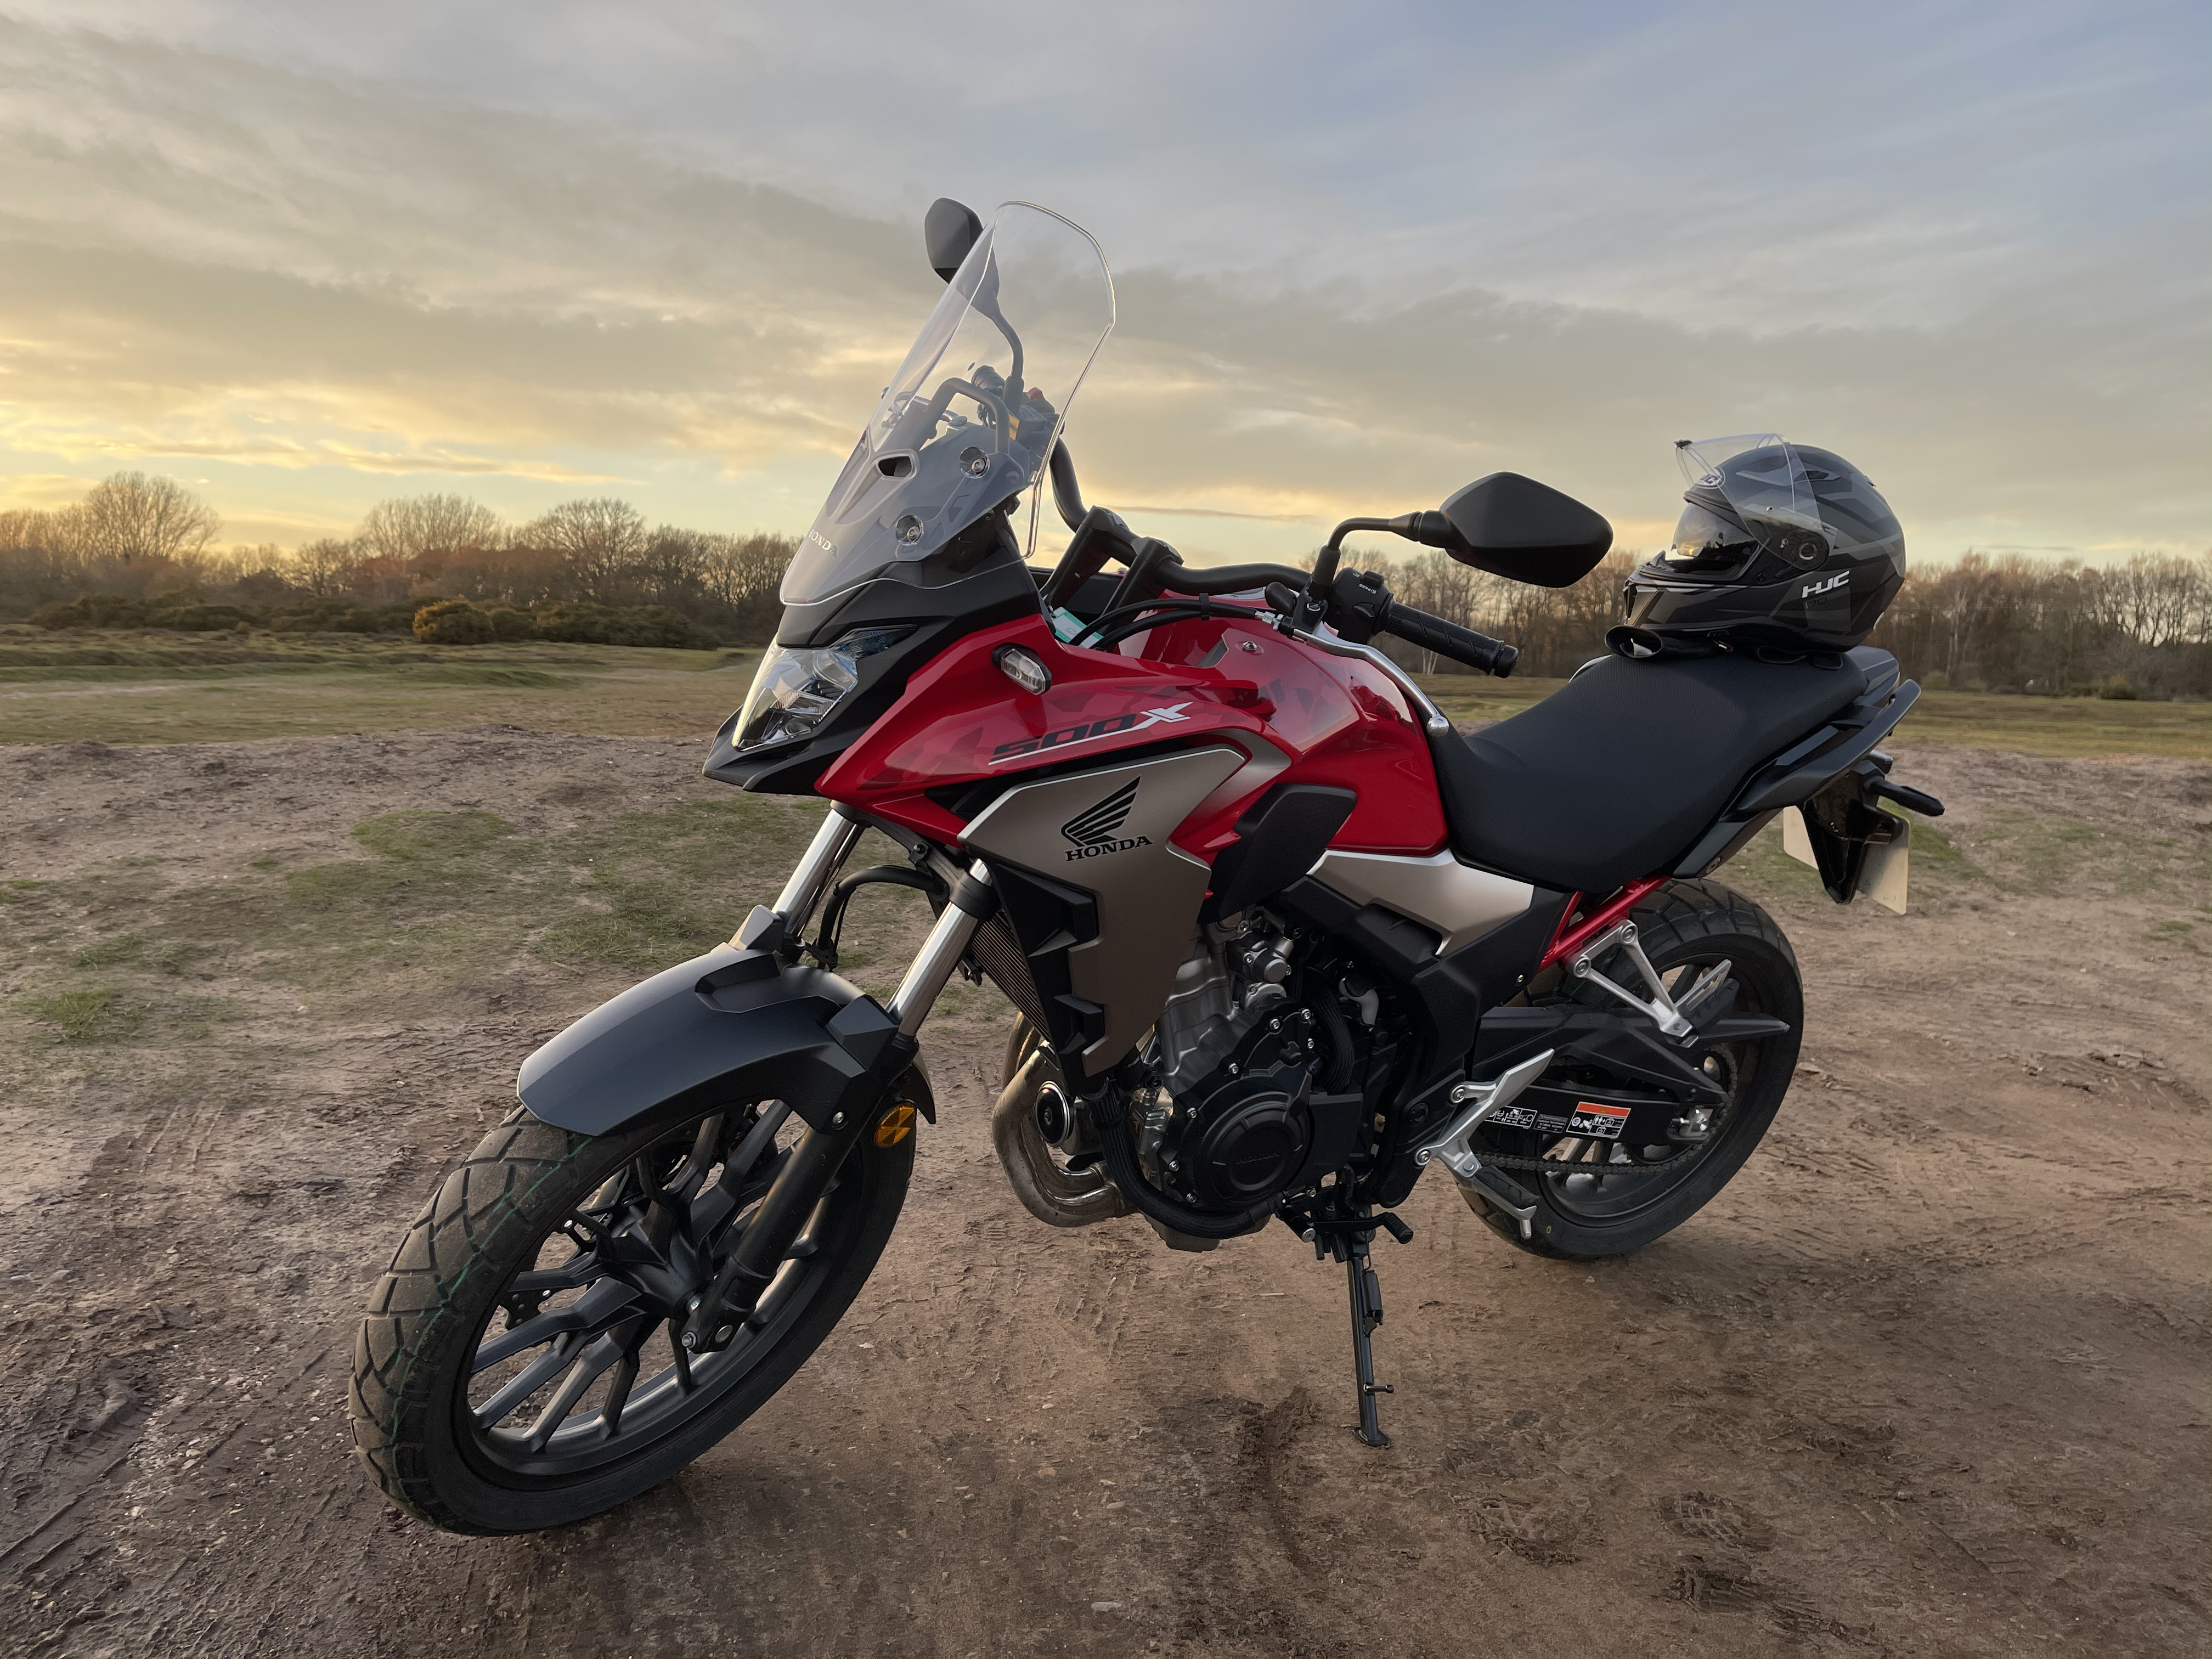 10 Things We Like About The Honda CB500X